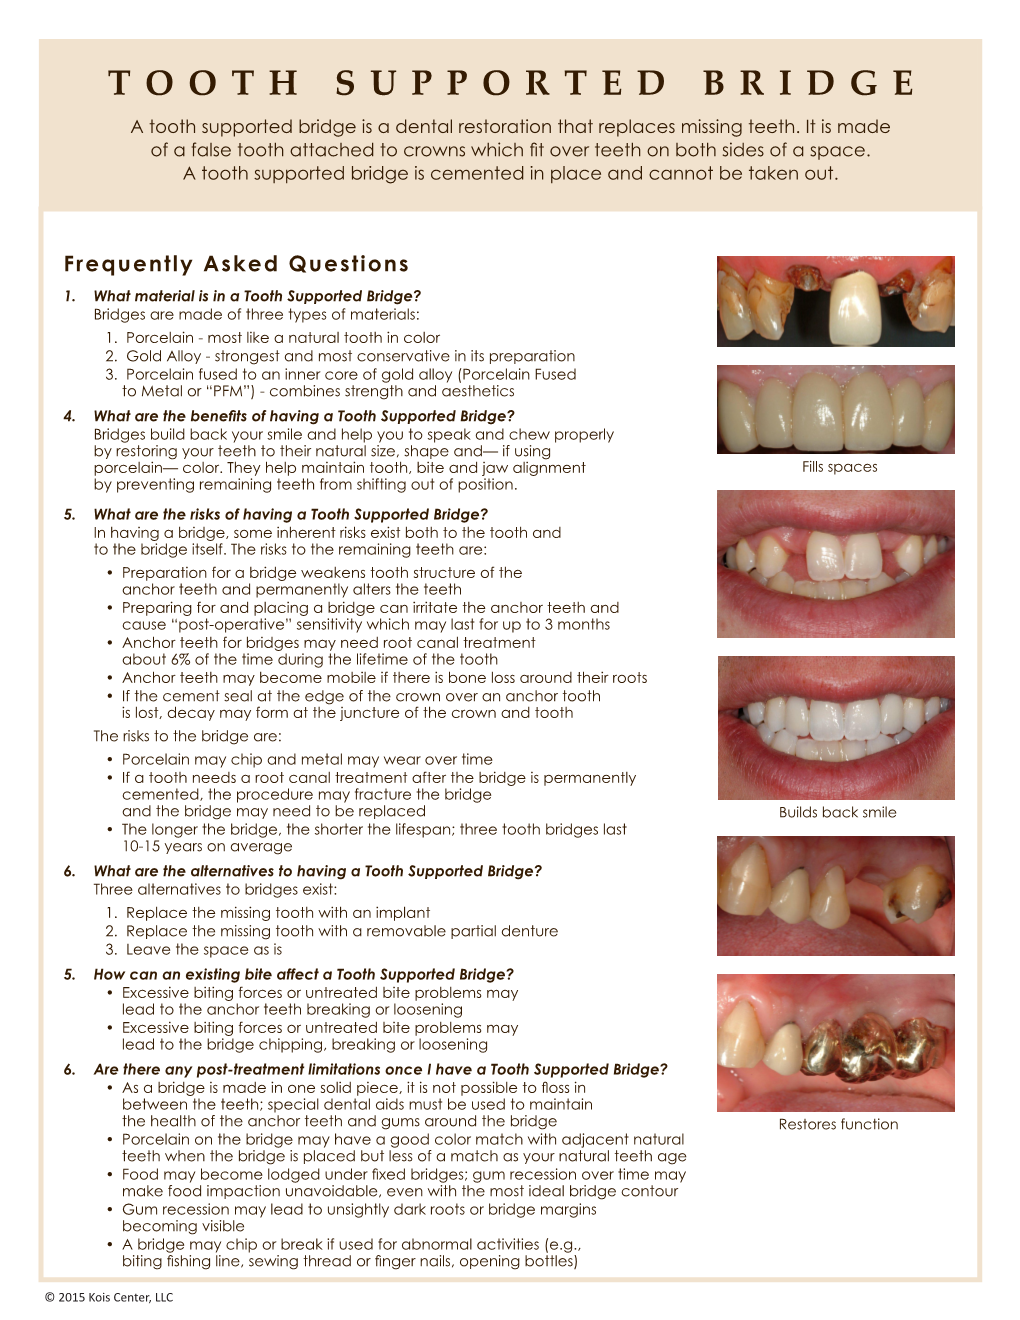 TOOTH SUPPORTED BRIDGE a Tooth Supported Bridge Is a Dental Restoration That Replaces Missing Teeth